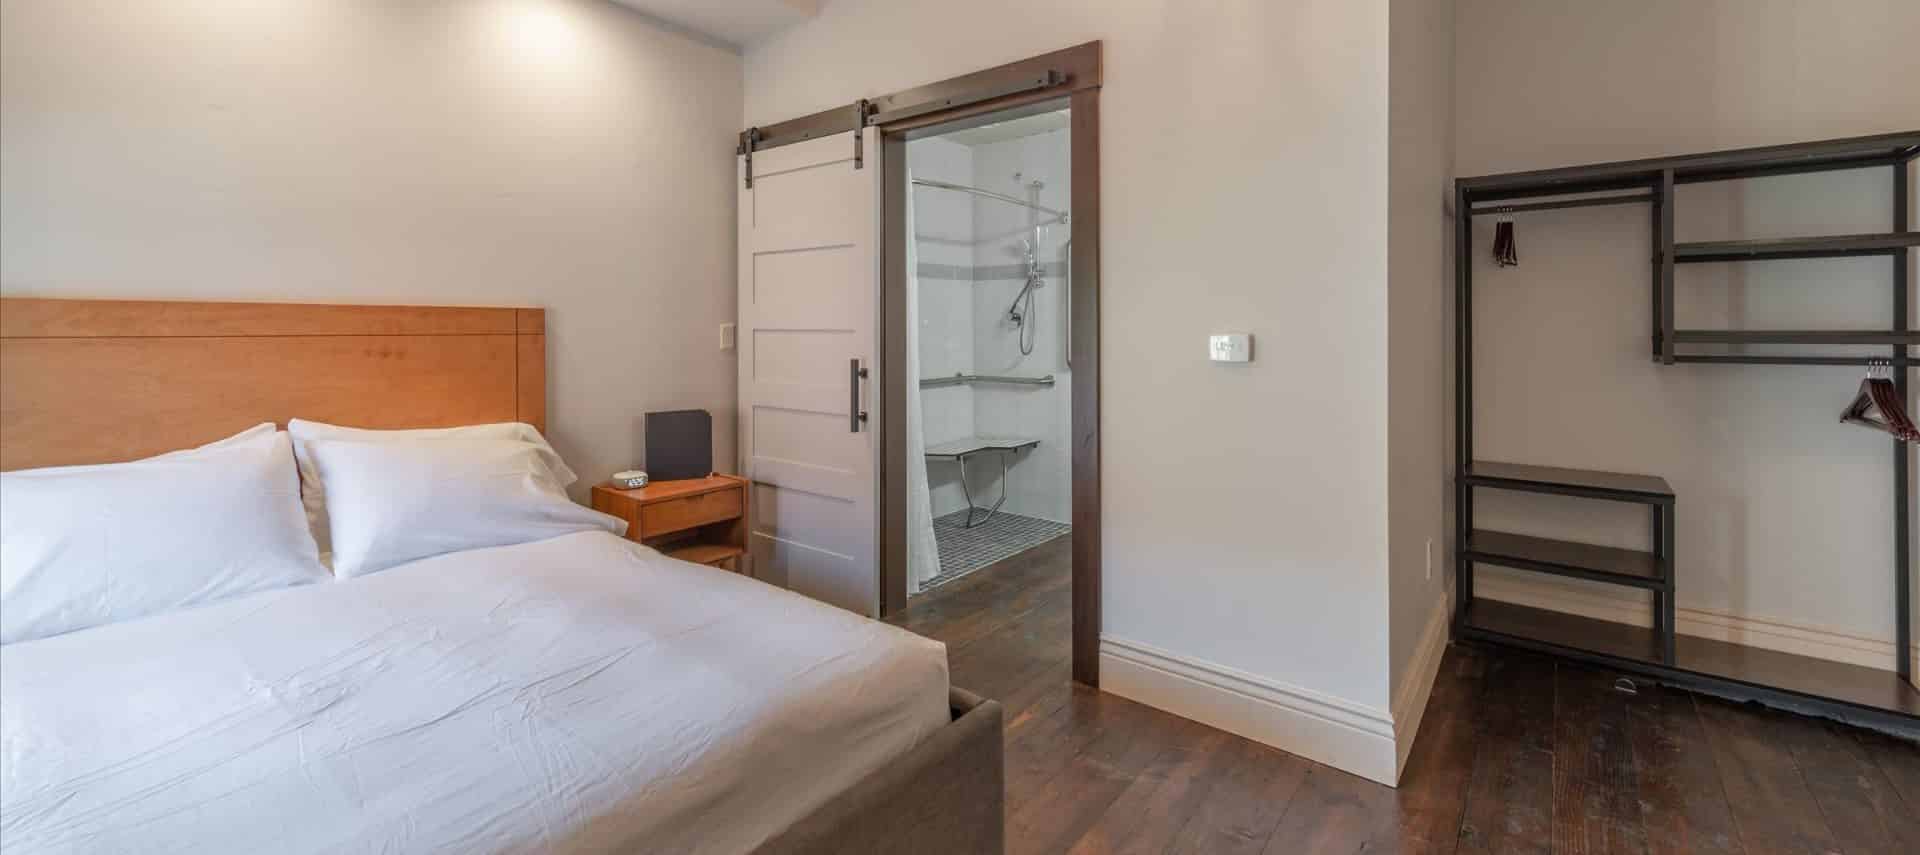 Large bedroom with hardwood floors, white walls, light wooden bed, white bedding, gray metal shelving, and view into bathroom